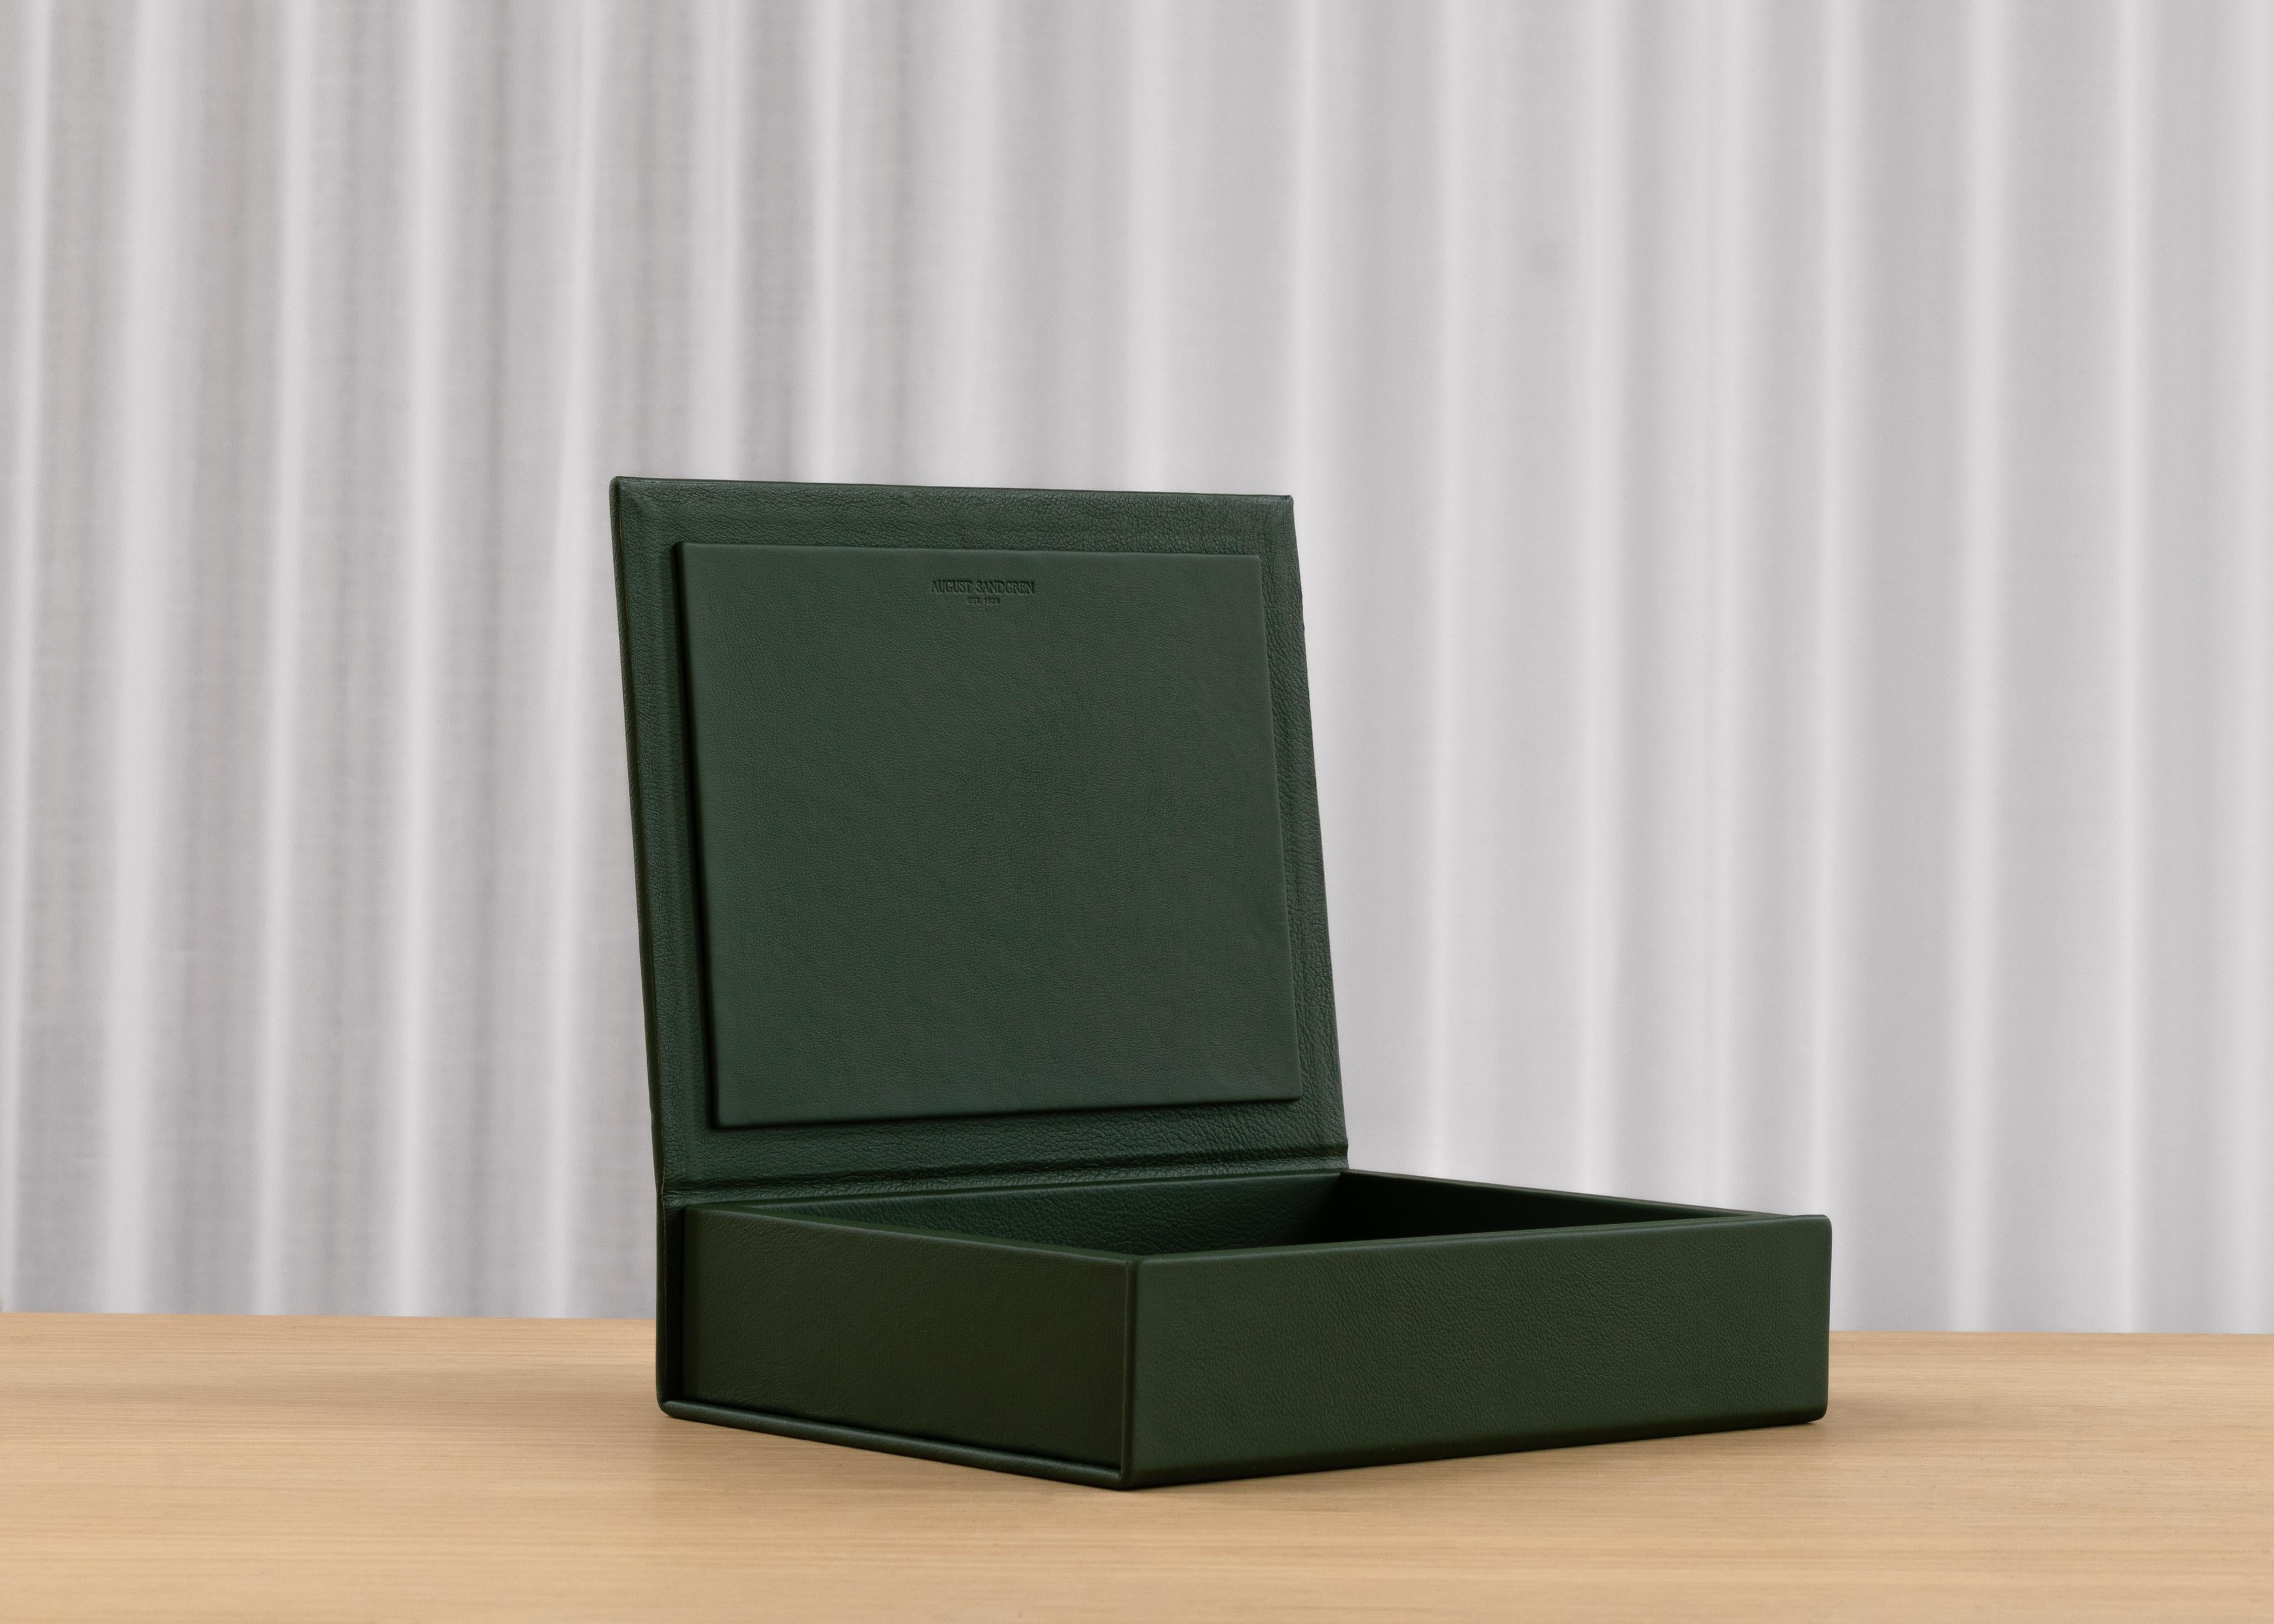 Handcrafted in Portugal from oekotex-certified leather, this Bookbox is part of our colour collection - it is vibrant, elegant and lights up any room while keeping your cherished belongings in order. Great for small piles of clutter too!

The